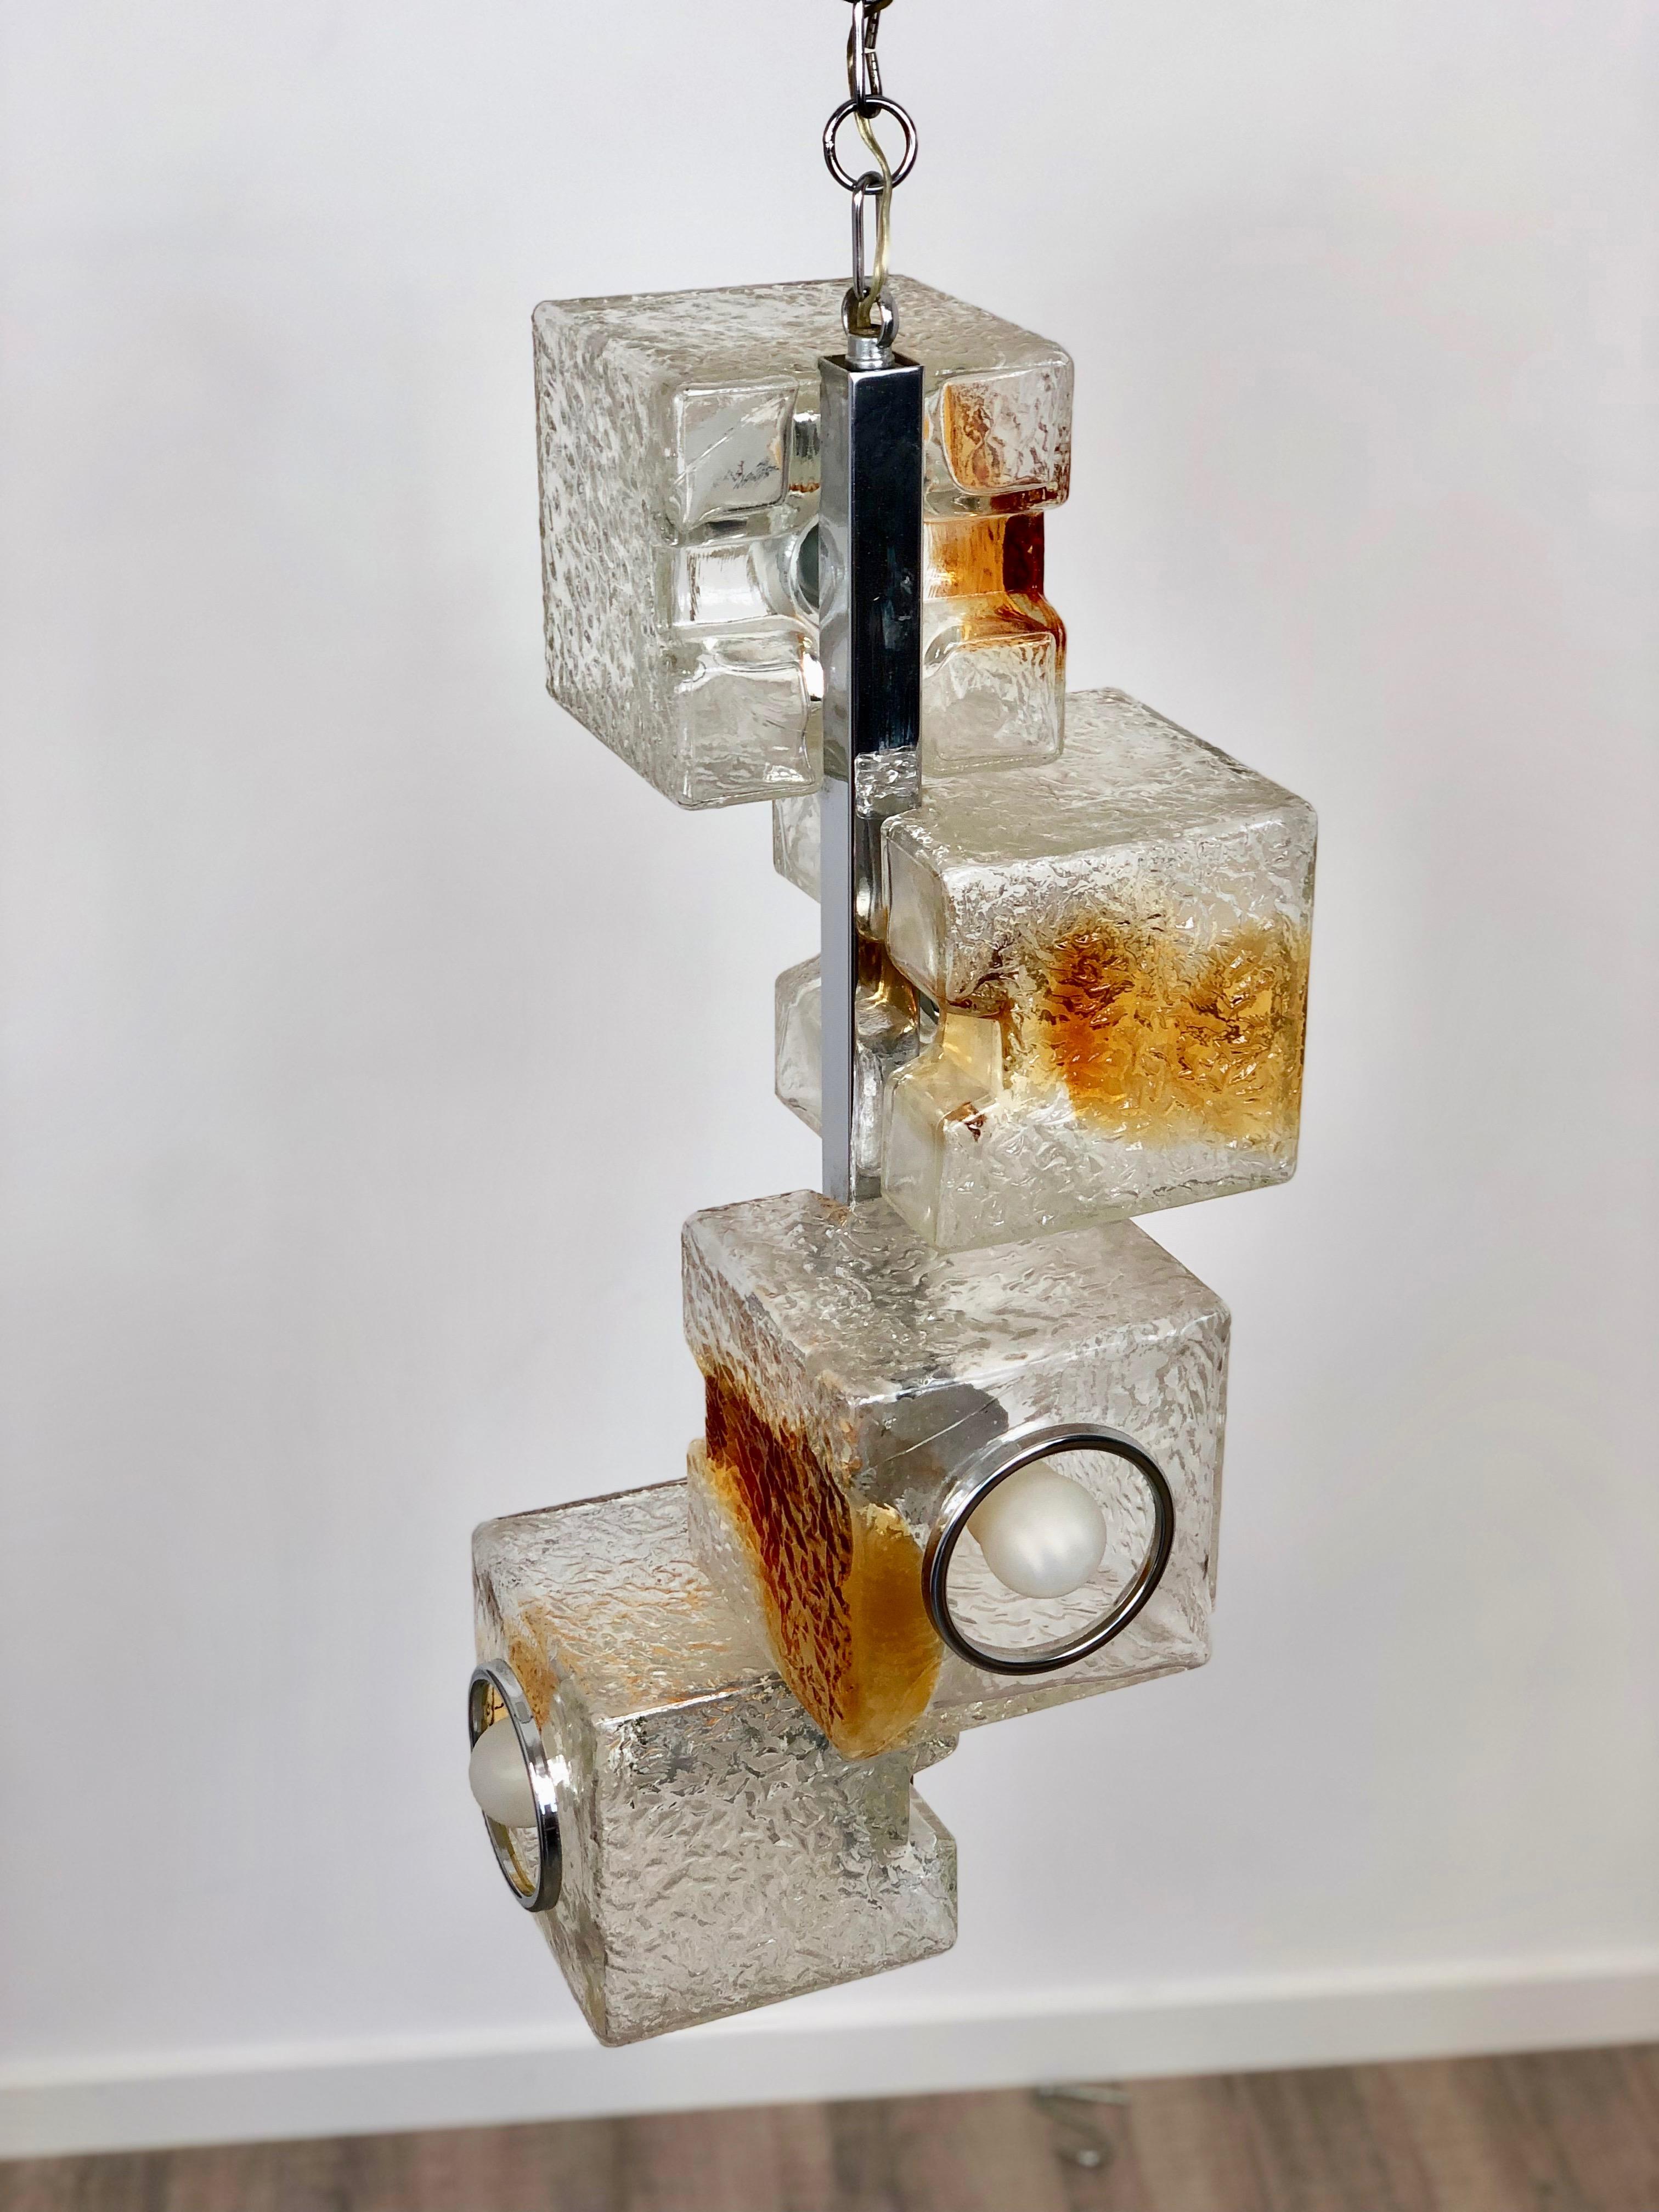 Toni Zuccheri for VeArt Sculpture Cube Design Chandelier 1970s Murano Art Glass In Good Condition For Sale In Rome, IT